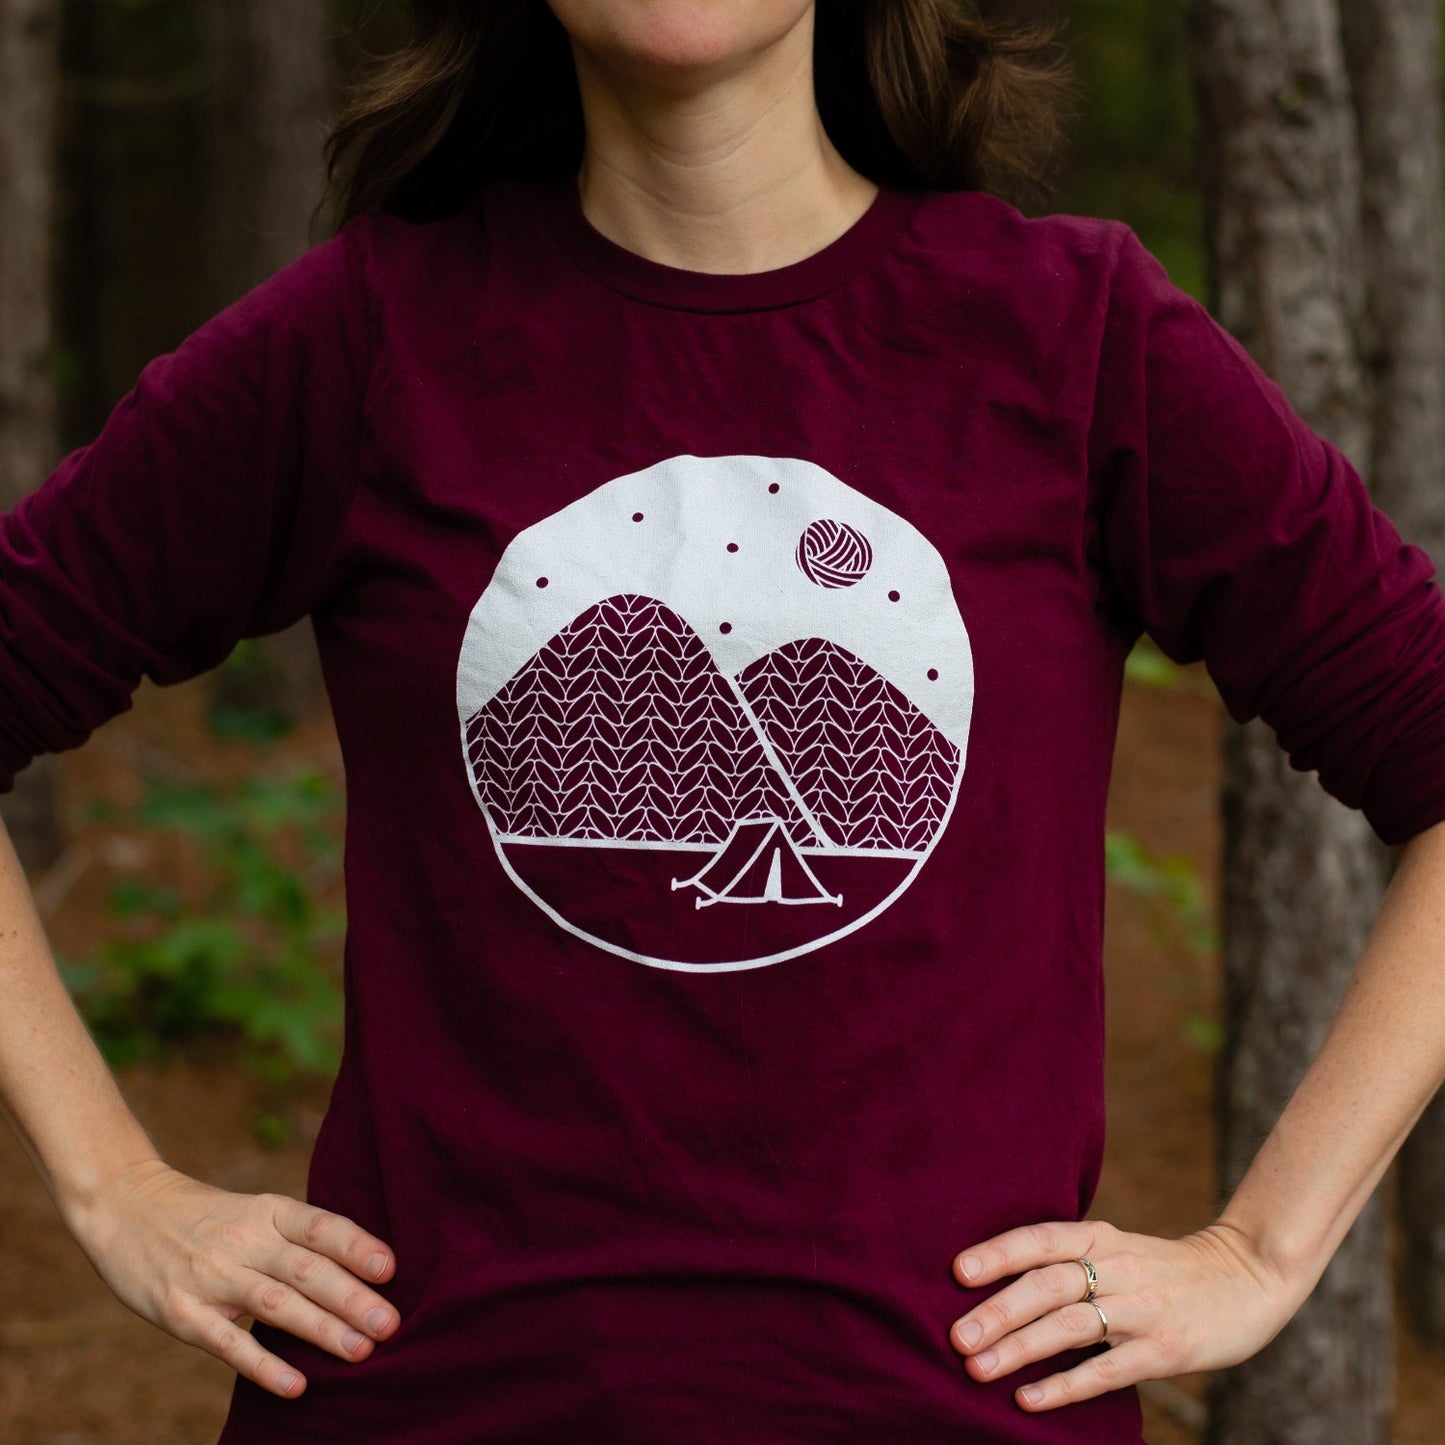 Camping long sleeve t-shirt for knitters